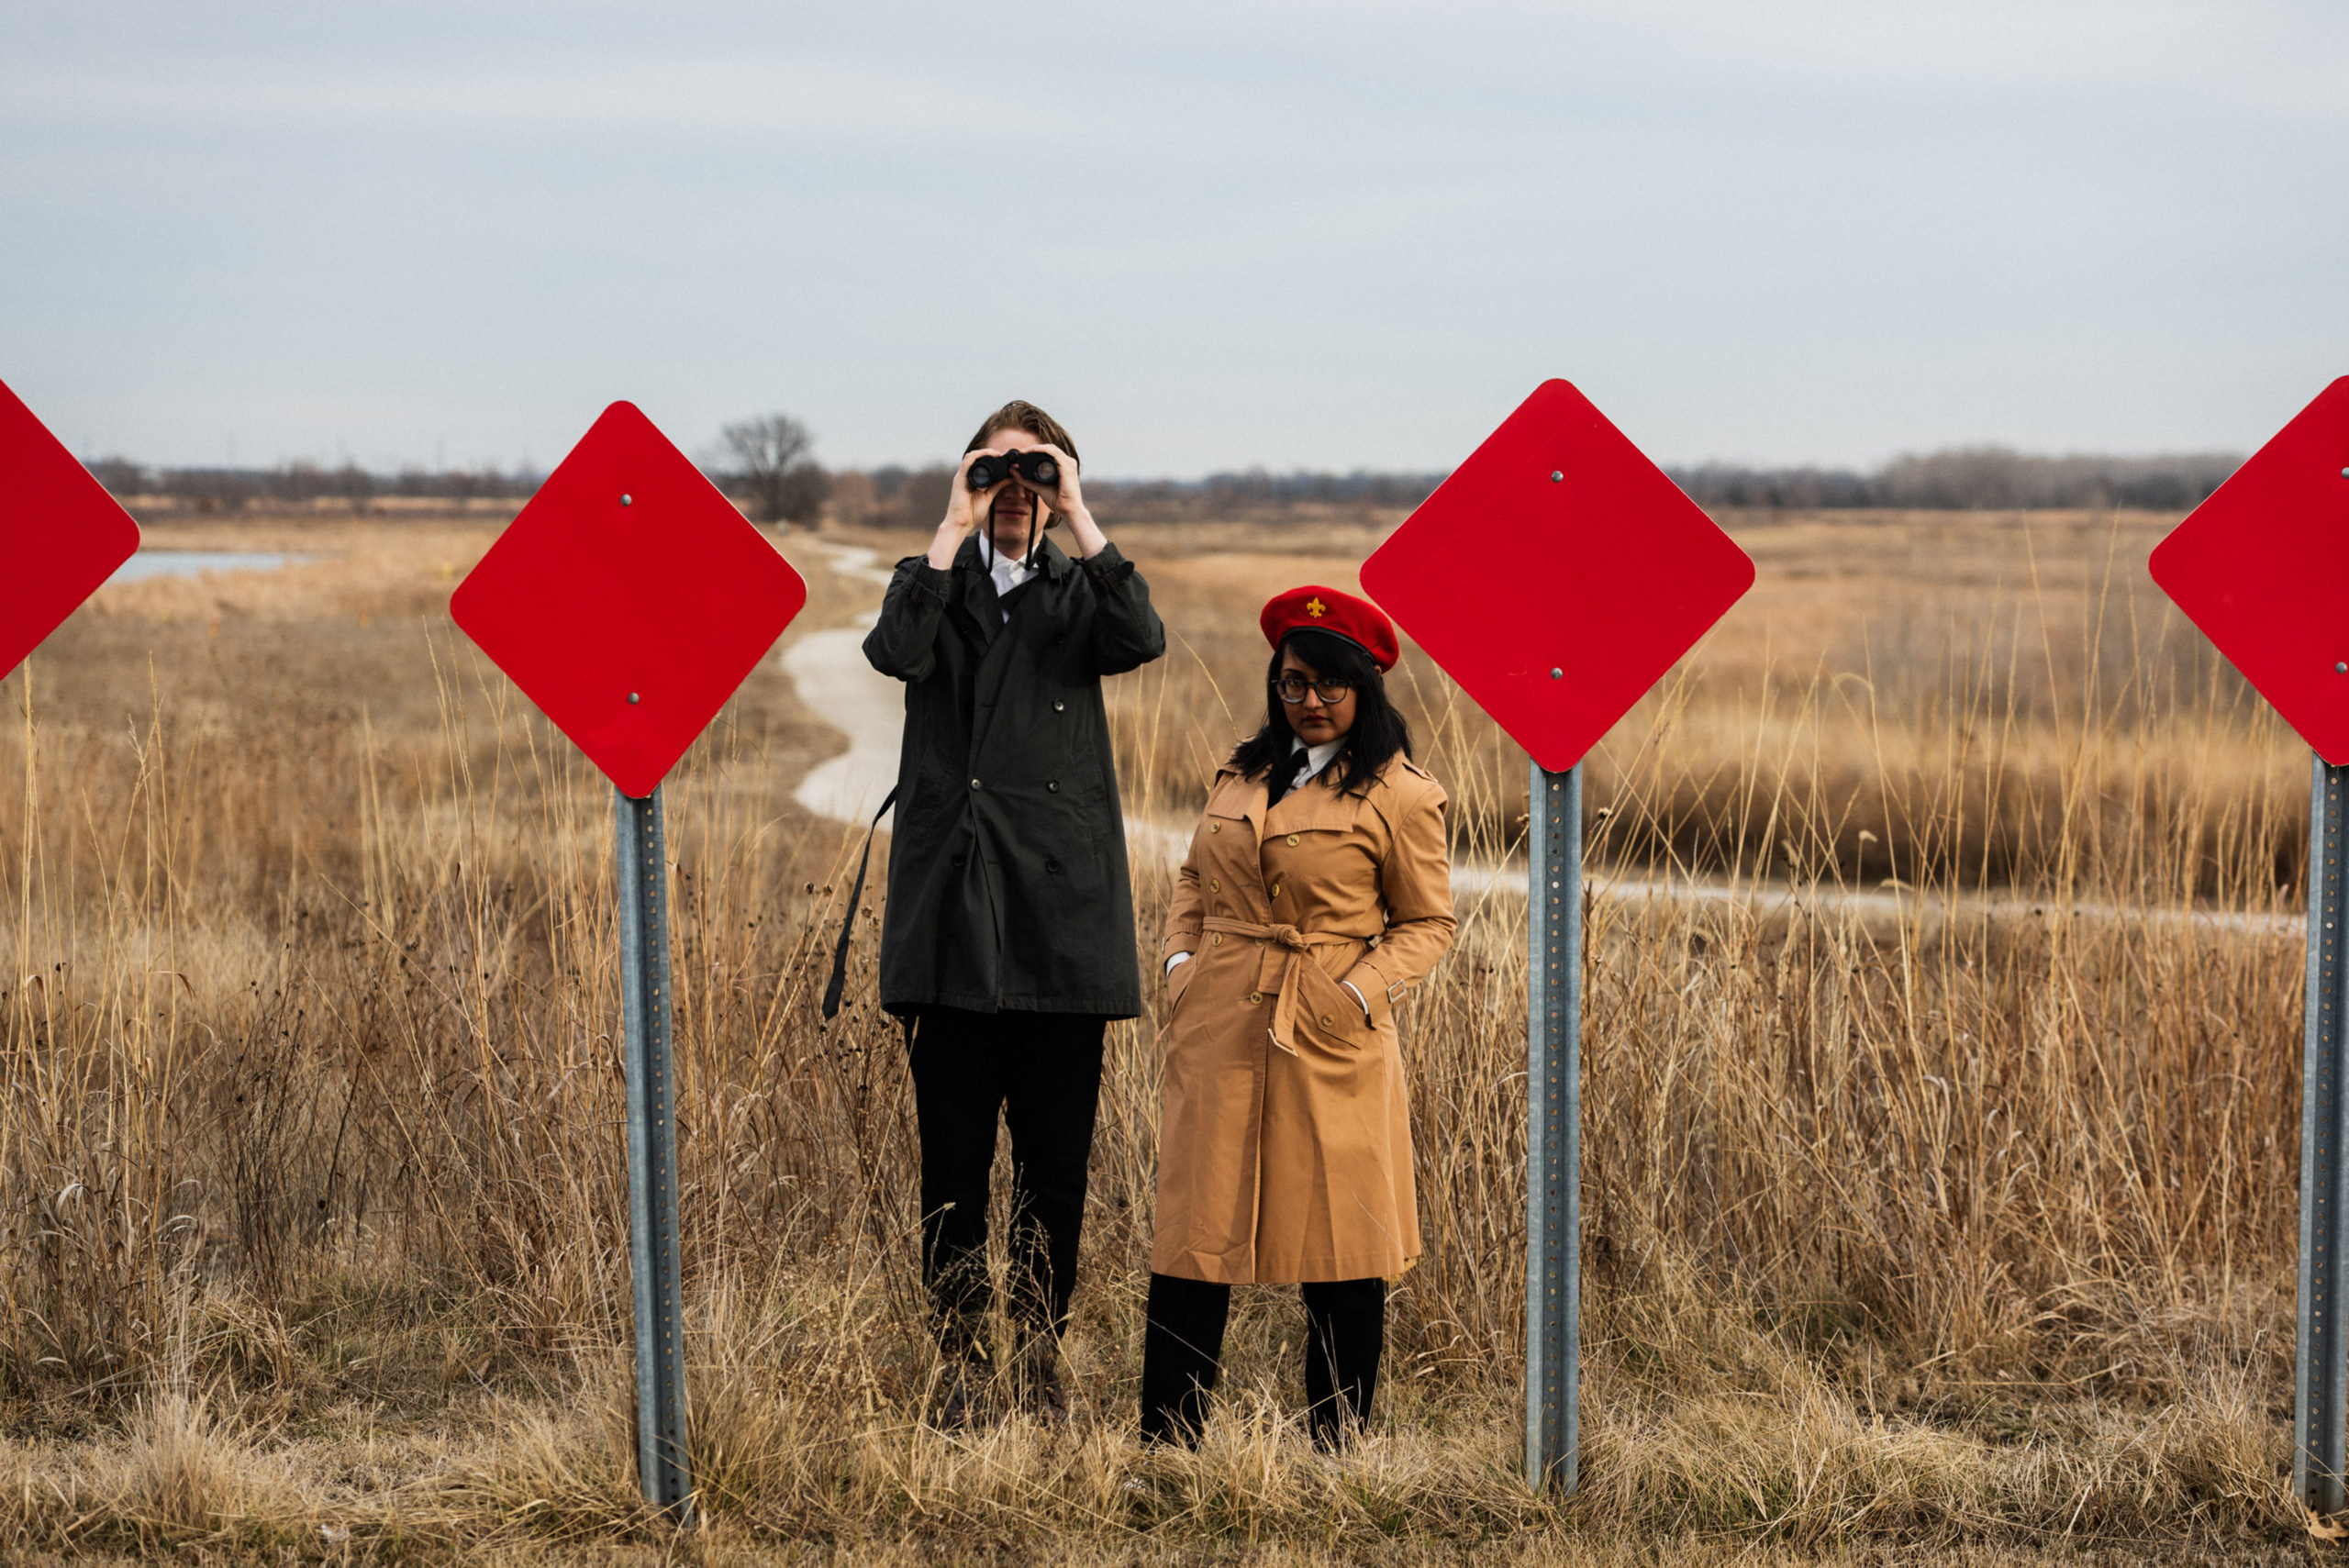 The duo of Sweeping Promises stand between red, diamond shaped road signs in front of a prairie of brown long grass